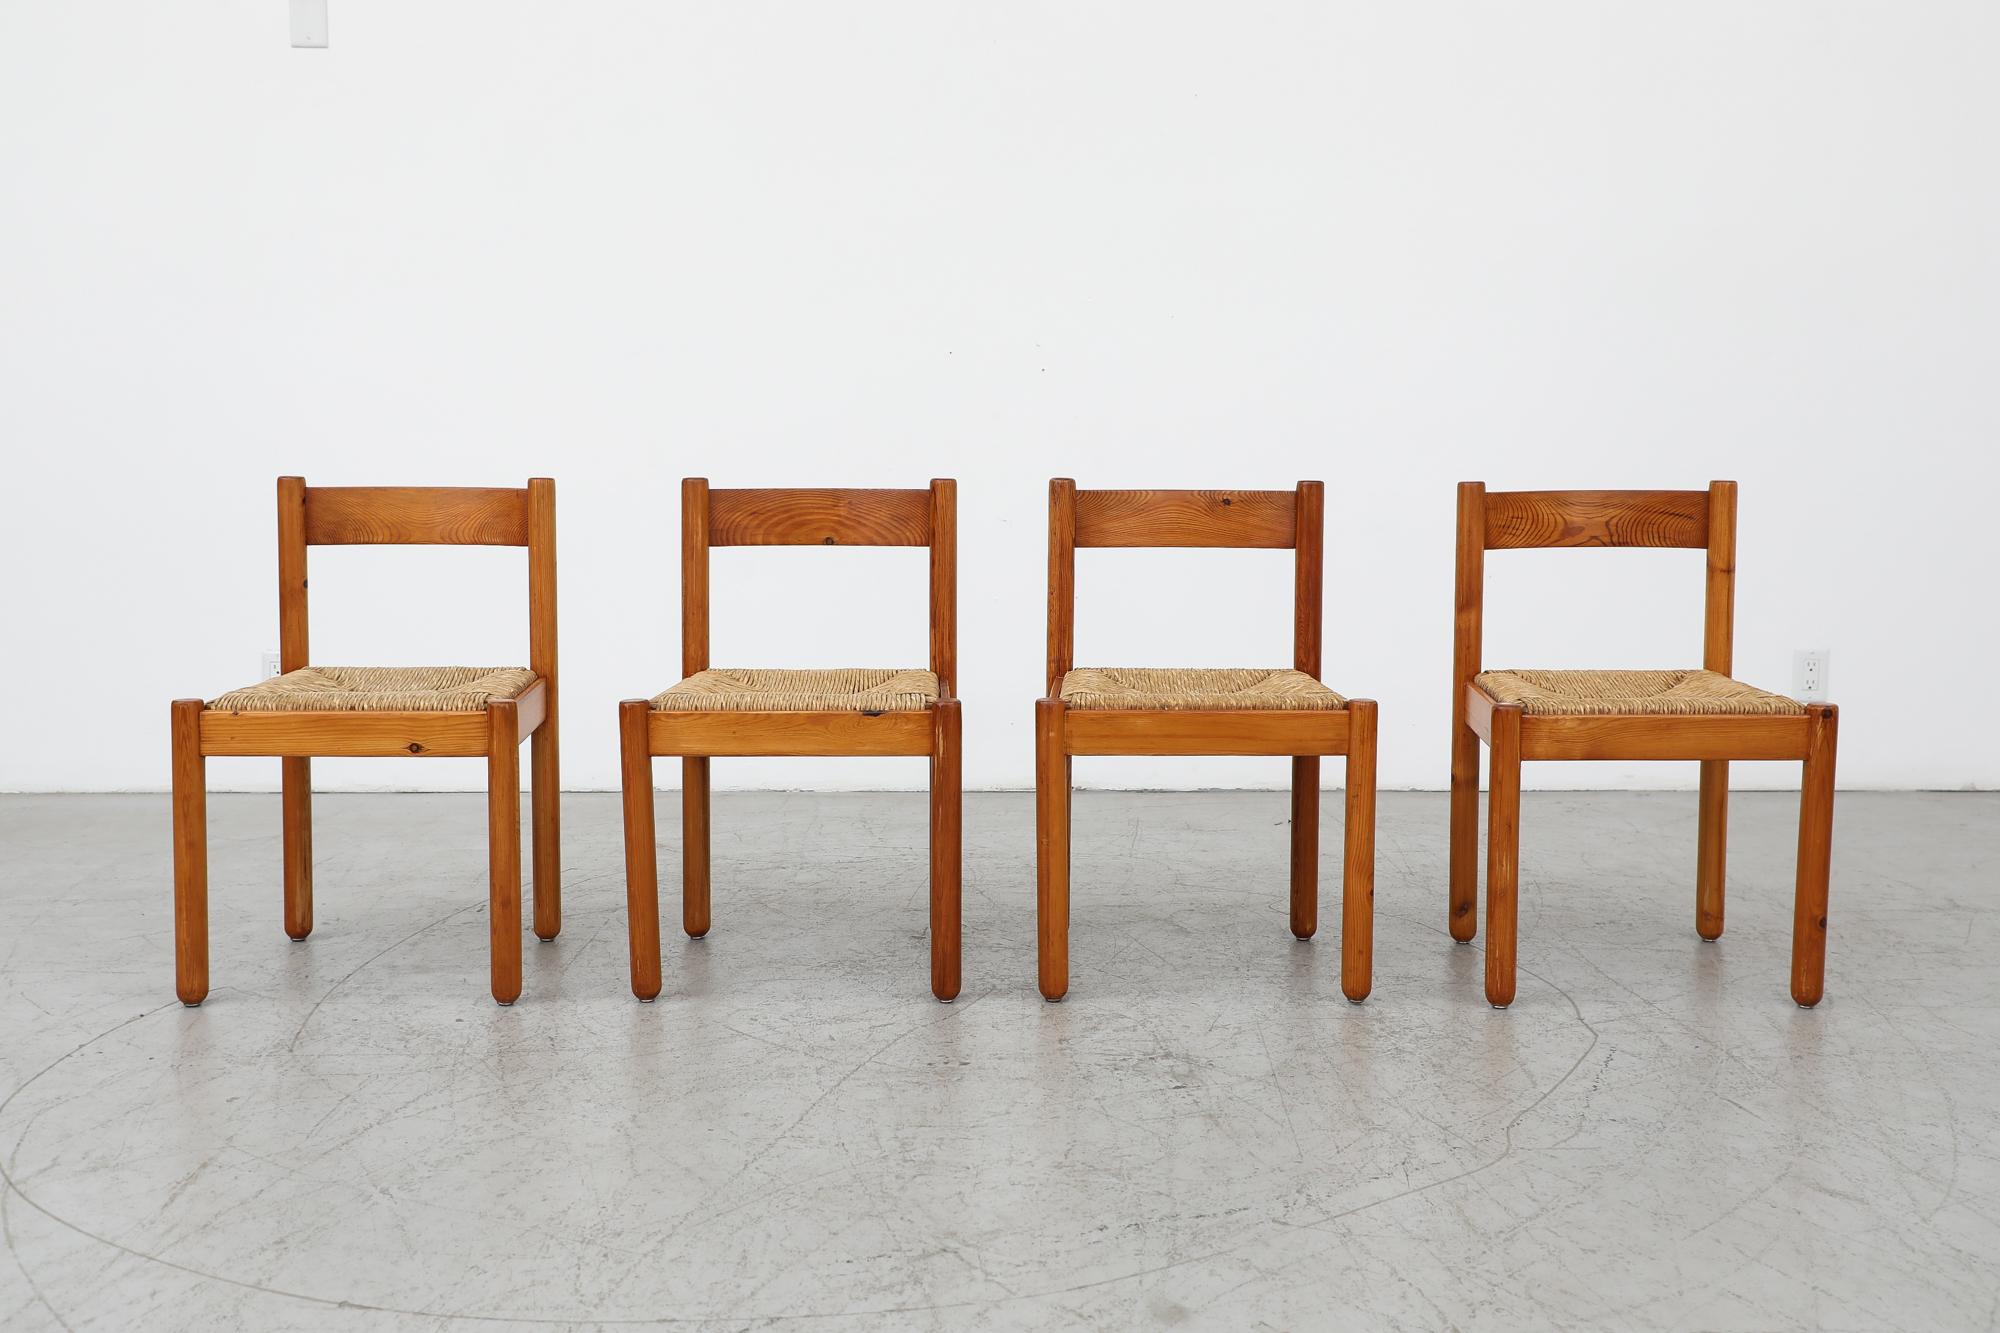 Set of 4, mid century, Vico Magistretti style Pine dining chairs with rush seats, 1960s. Solid pine frames complimented by woven rush seats. In original condition with some visible wear and lovely patina consistent with age and use. Set Price.